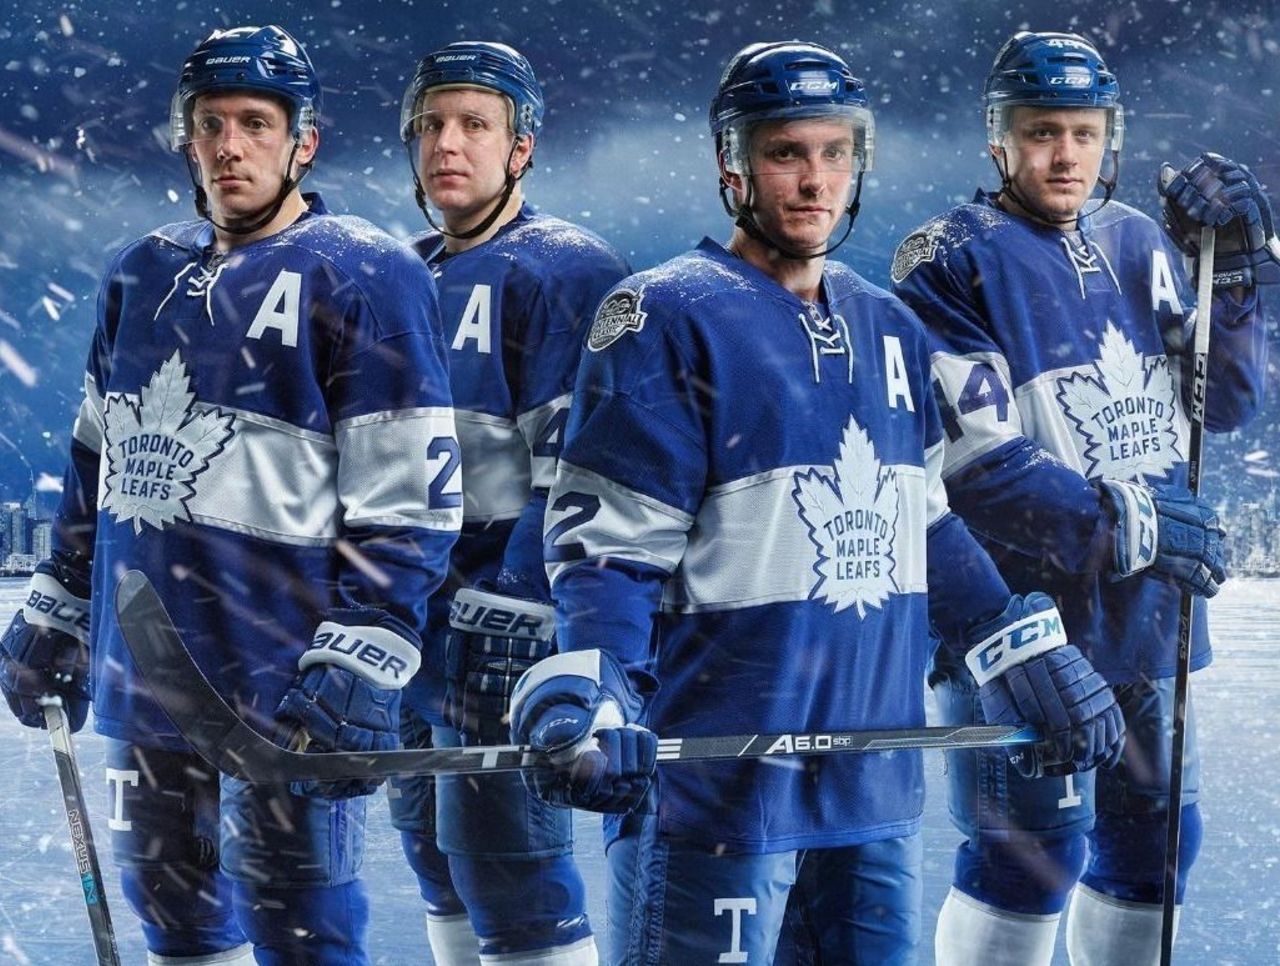 Red vs Blue at Winter Classic? Leafs, Wings Jerseys Spotted